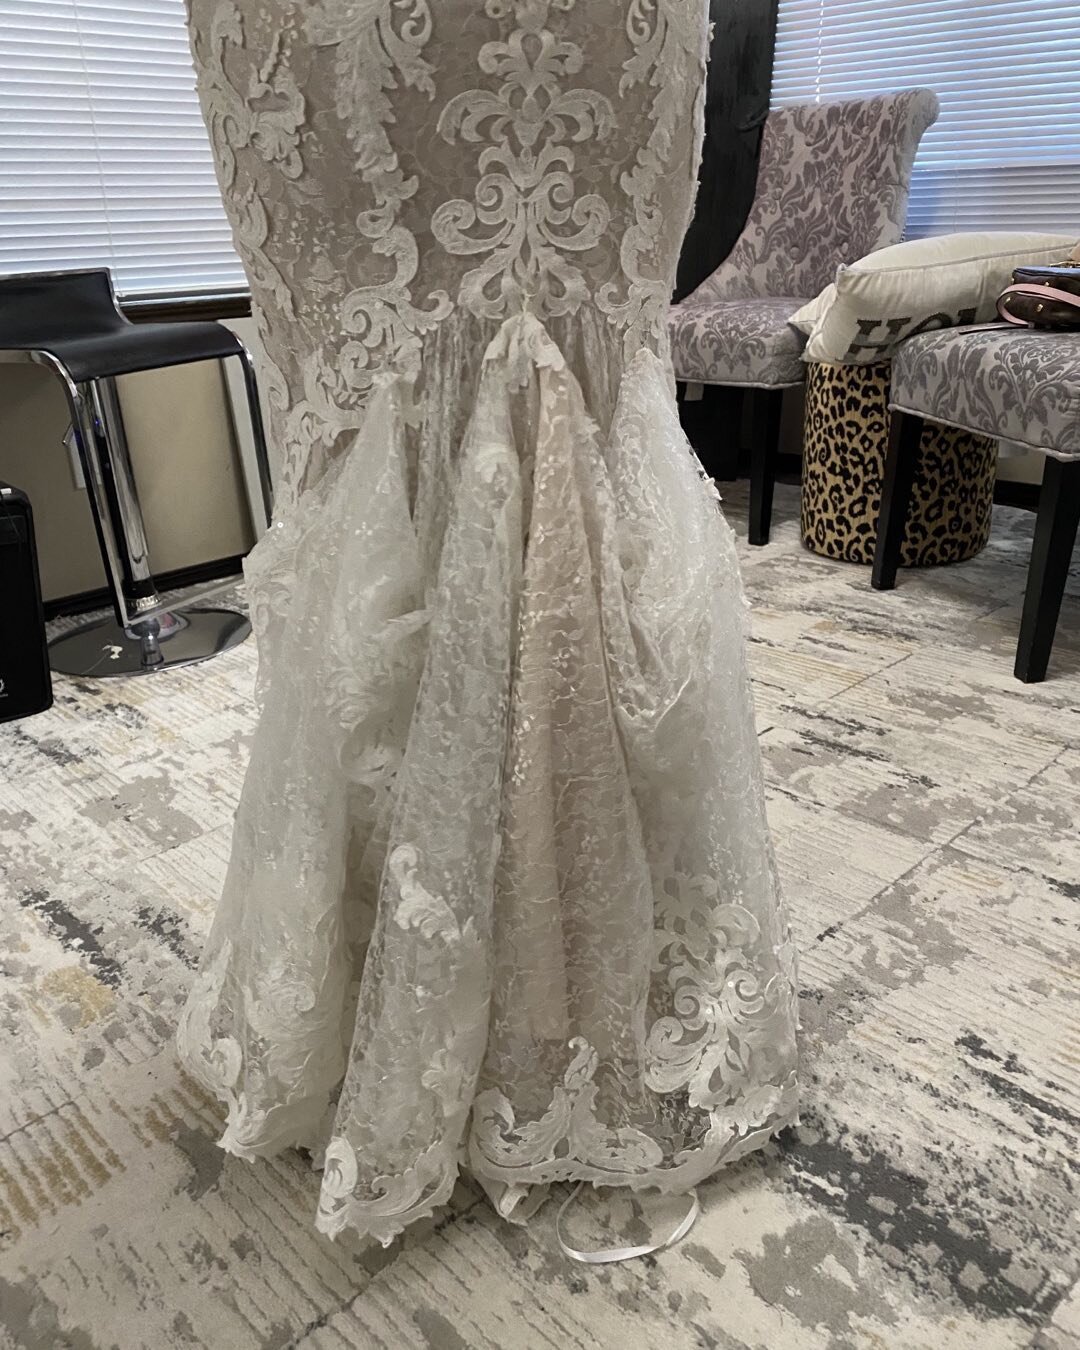 Three point bustle on a fully lace dress! 
.
.
.
.
#dress #wedding #alterations #calgary #brides